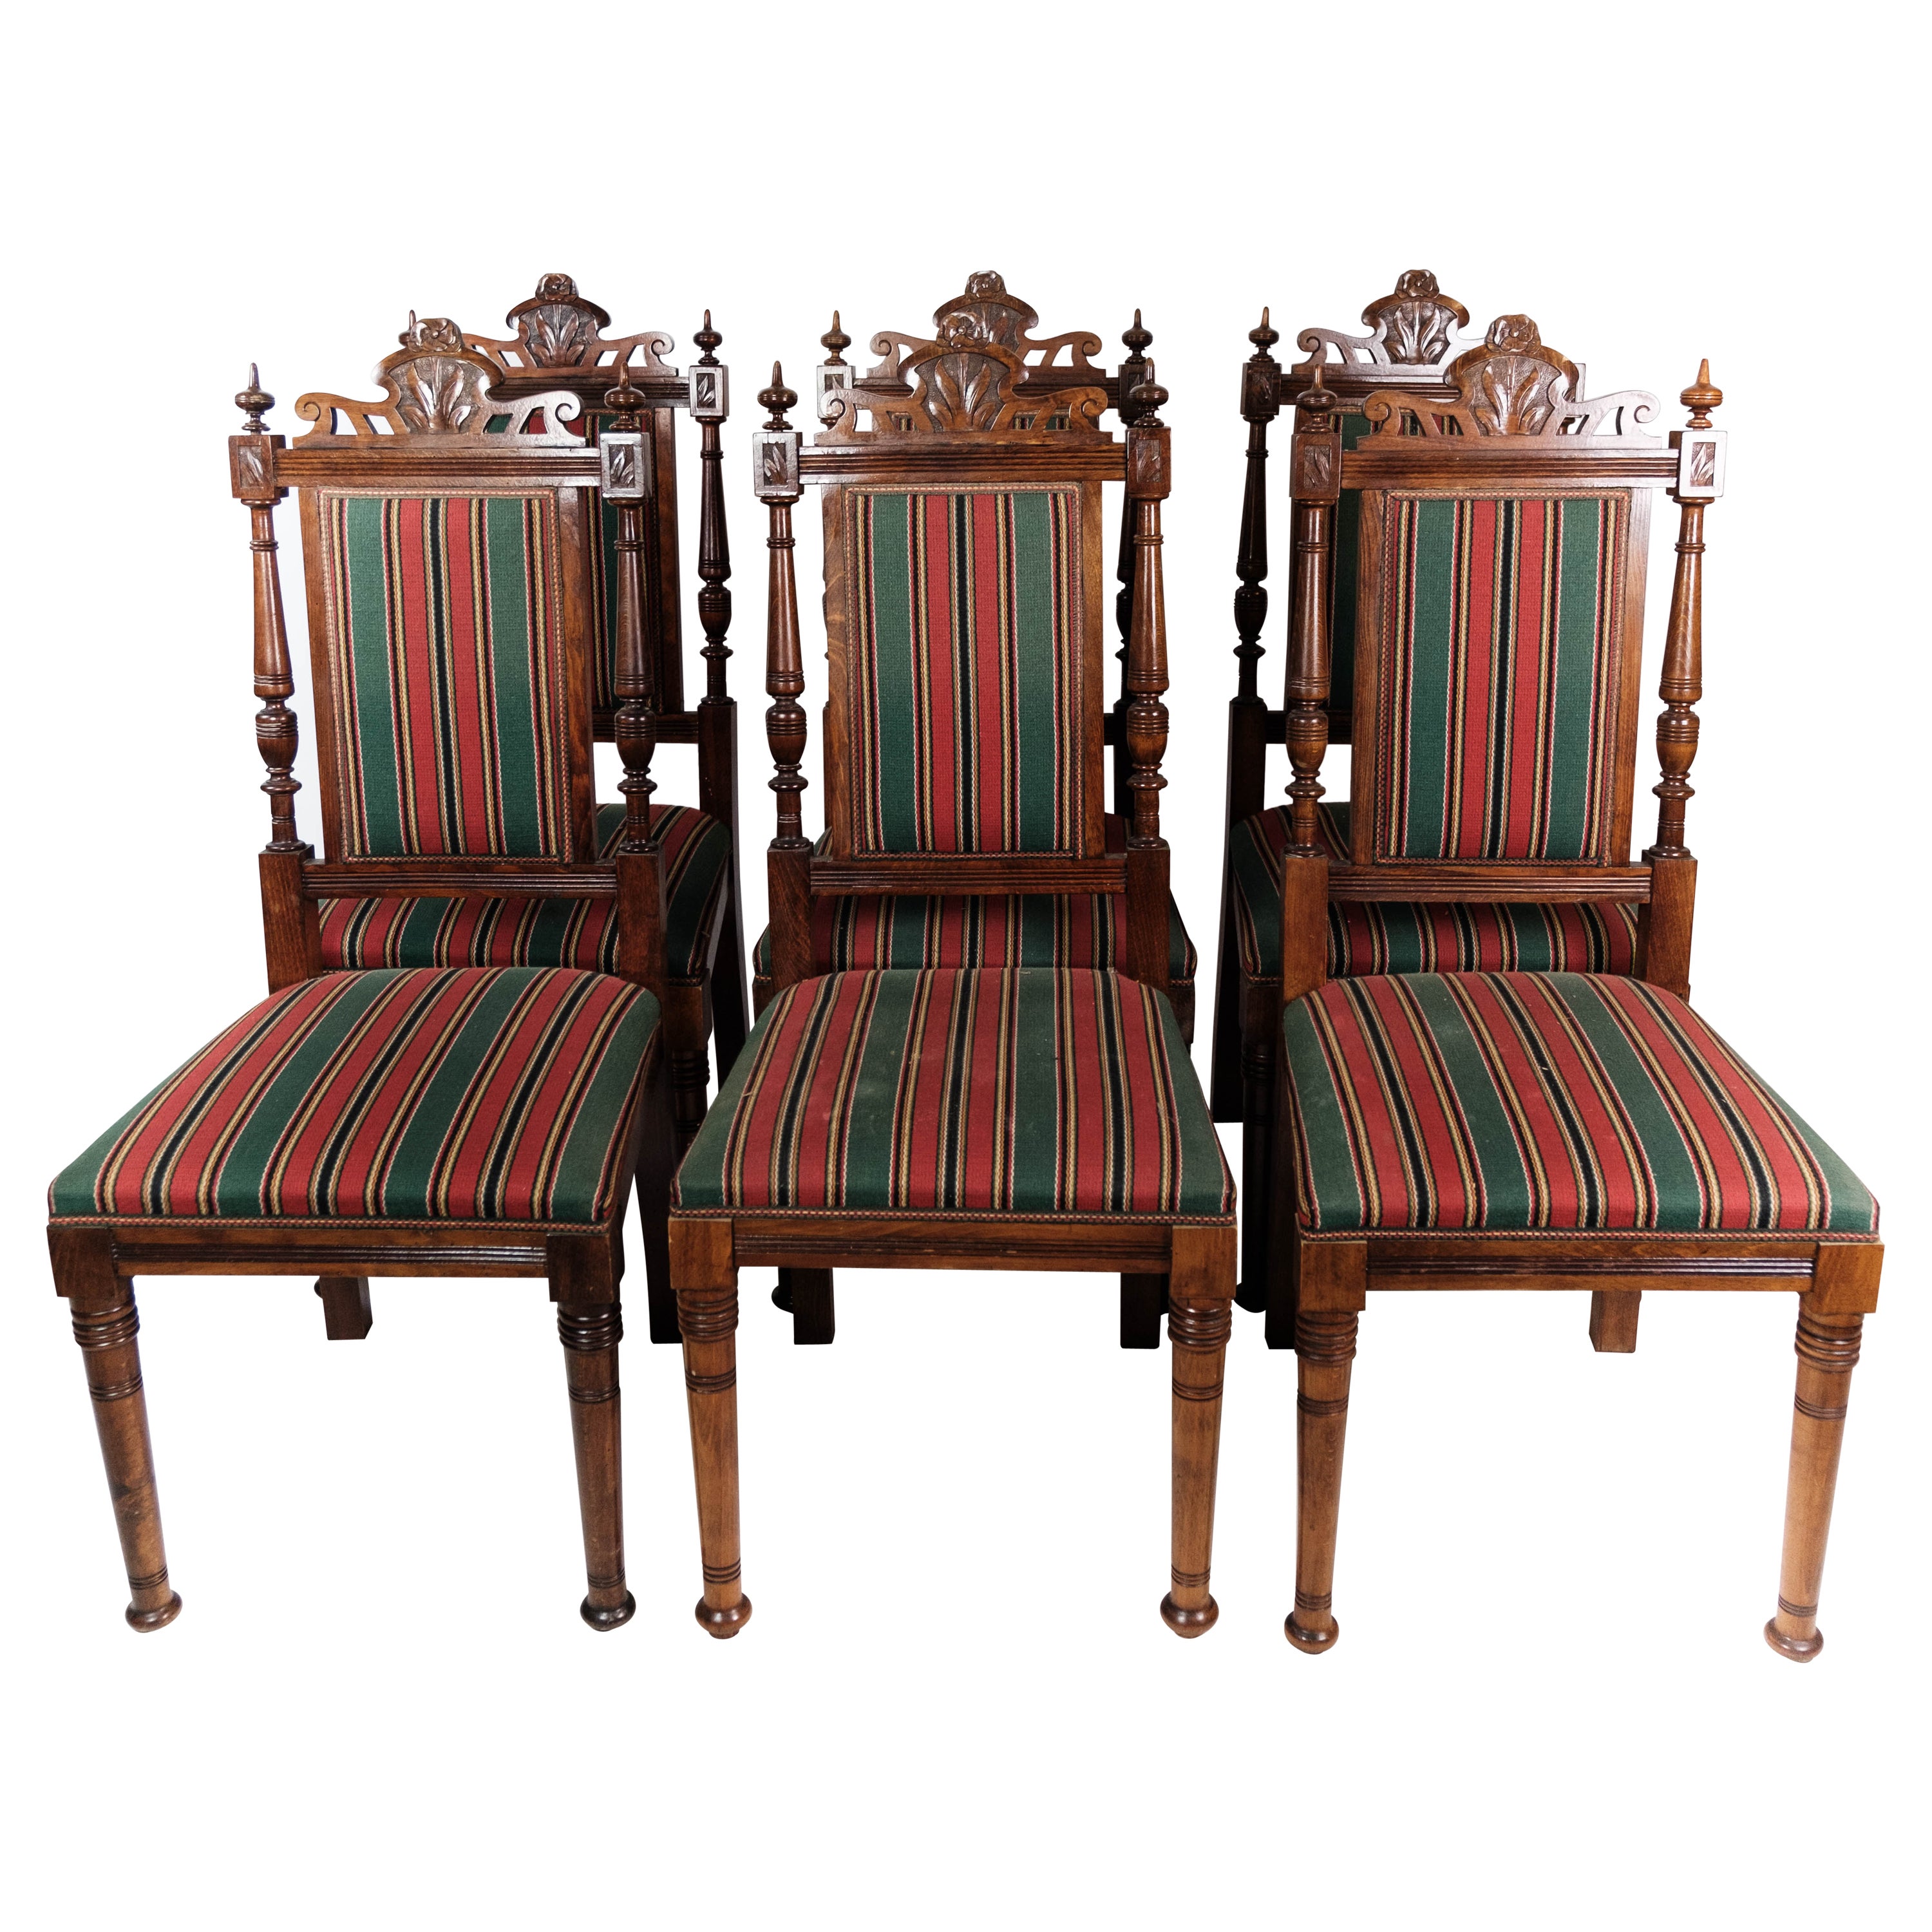 Set of Six Dining Room Chairs of Oak and Upholstered with Striped Fabric, 1920s